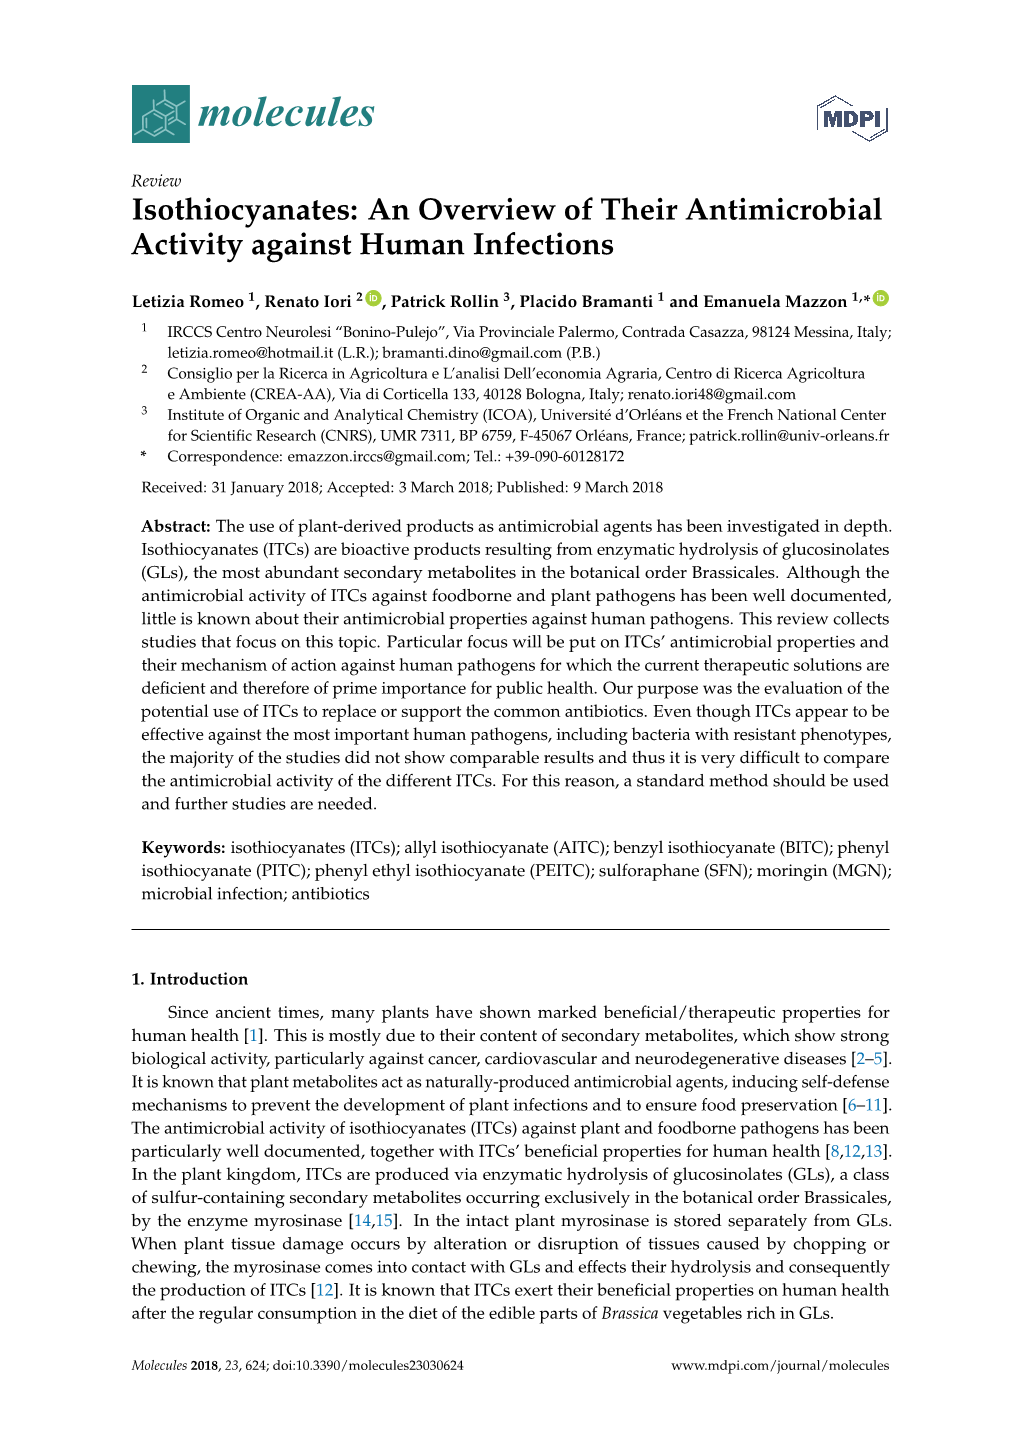 An Overview of Their Antimicrobial Activity Against Human Infections